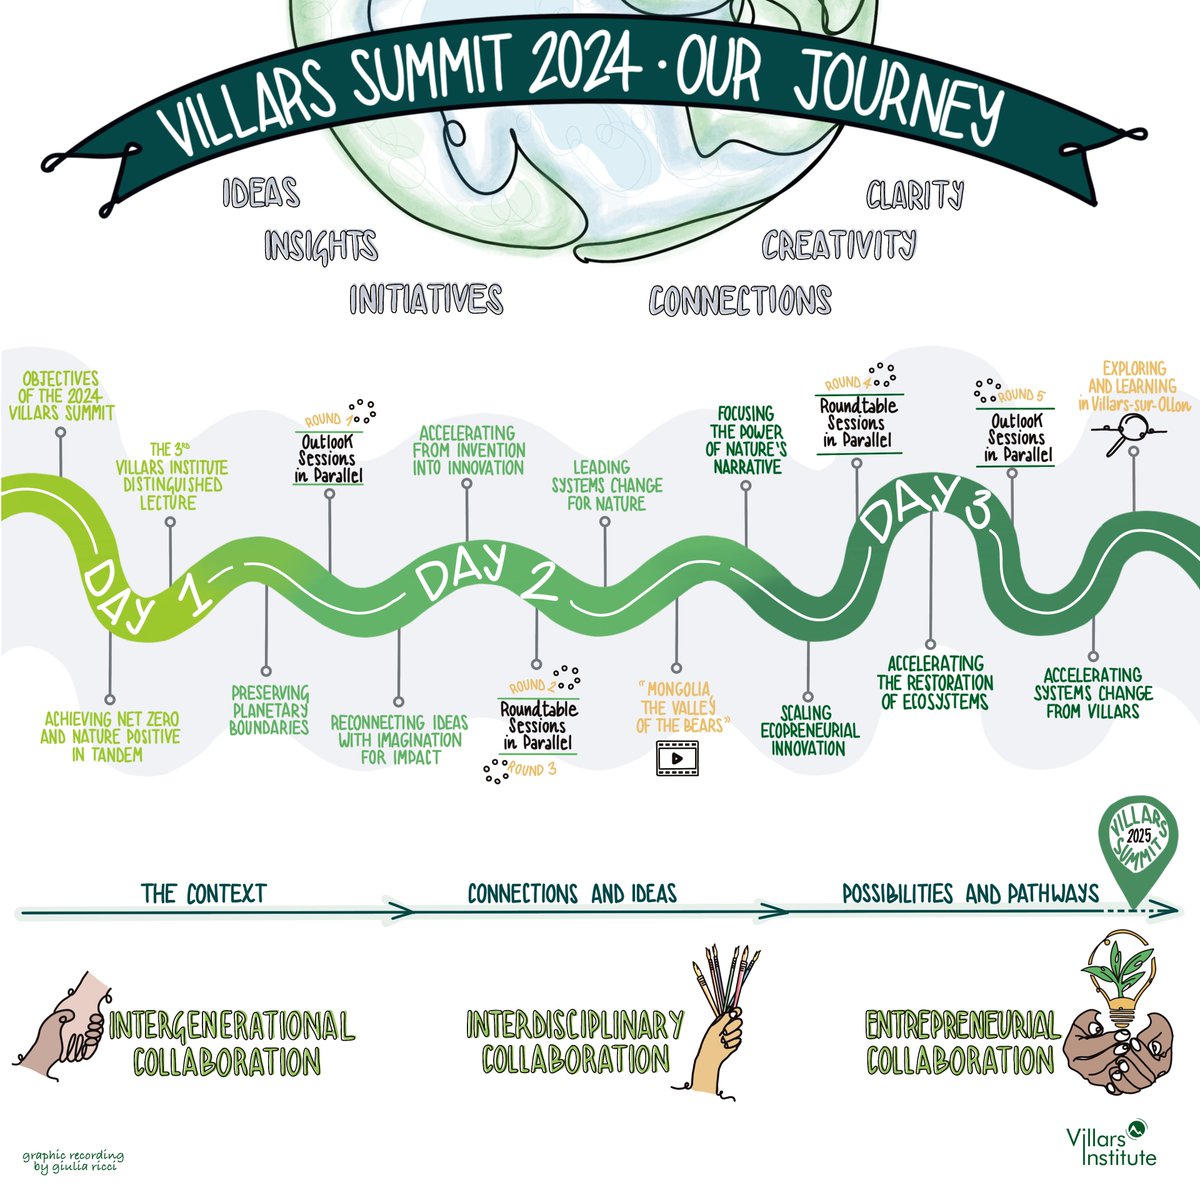 Bringing together insights and ideas from around the world and across generations, creating opportunities to foster #InterdisciplinaryCollaboration for a healthier planet 🌍 It’s inspiring to embark on the #VillarsSummit 2024 - a shared journey accelerating #SystemsChange 🙌